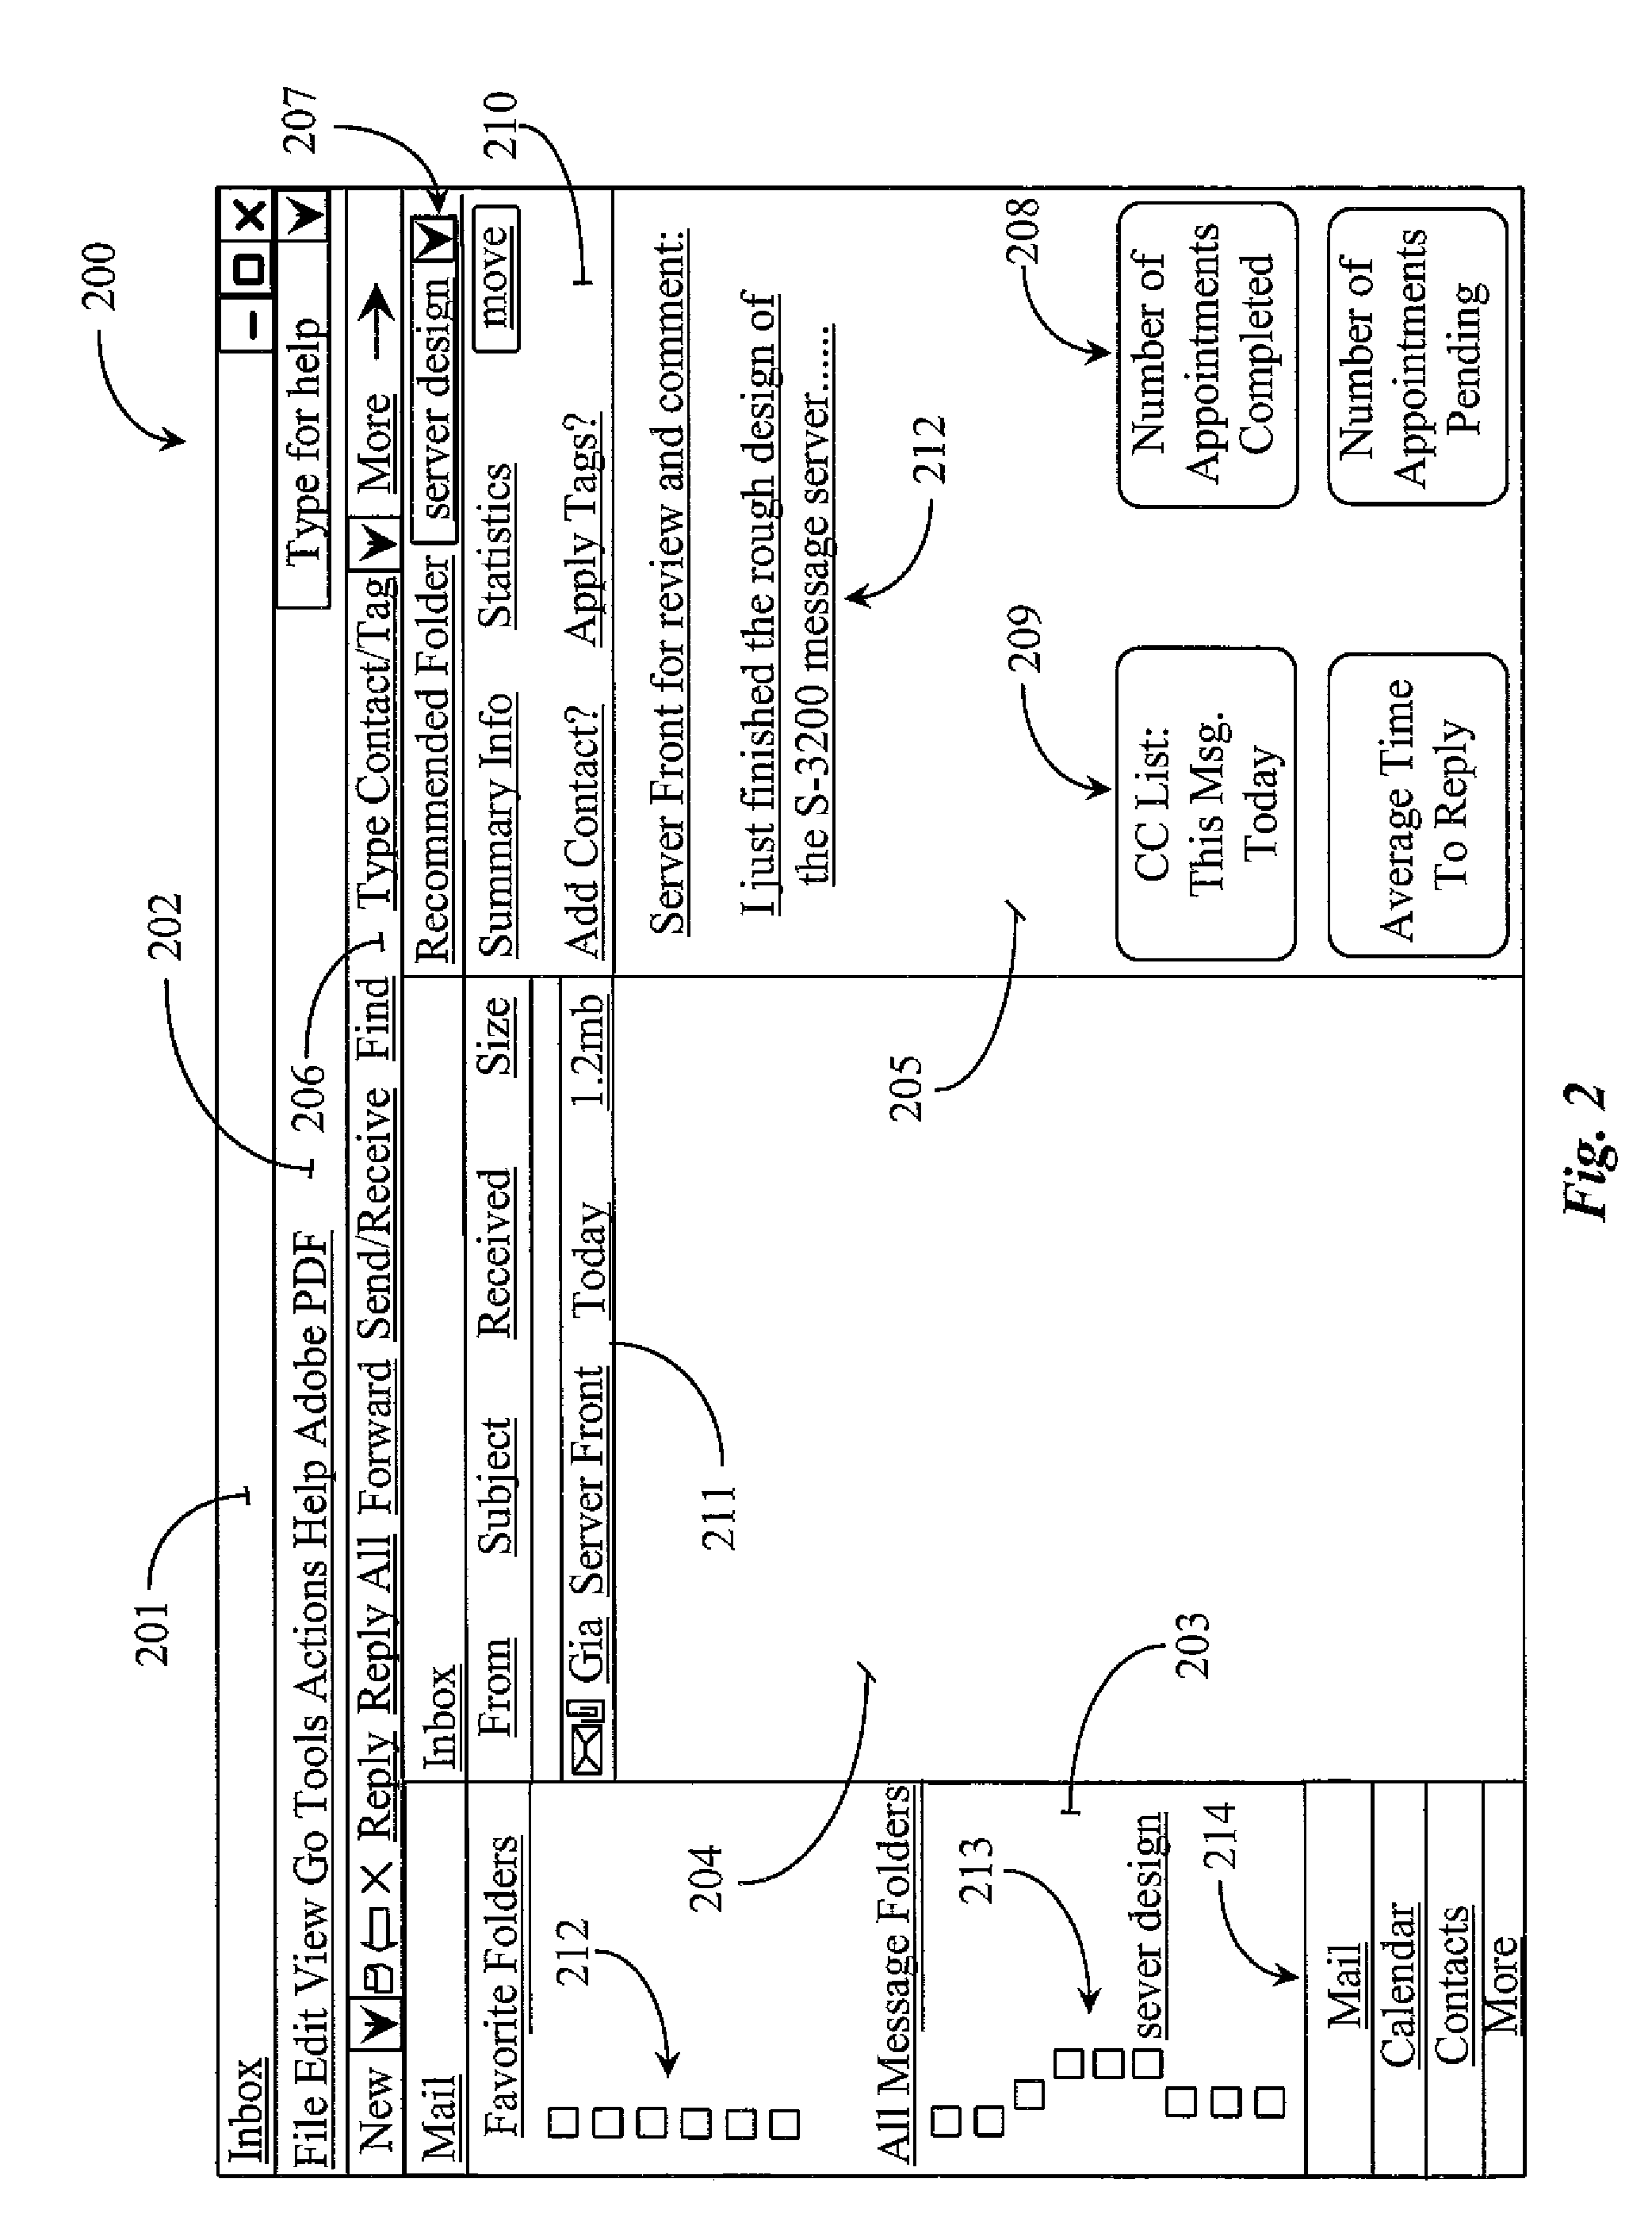 System for Creating Associations Between Elements of a Message Application